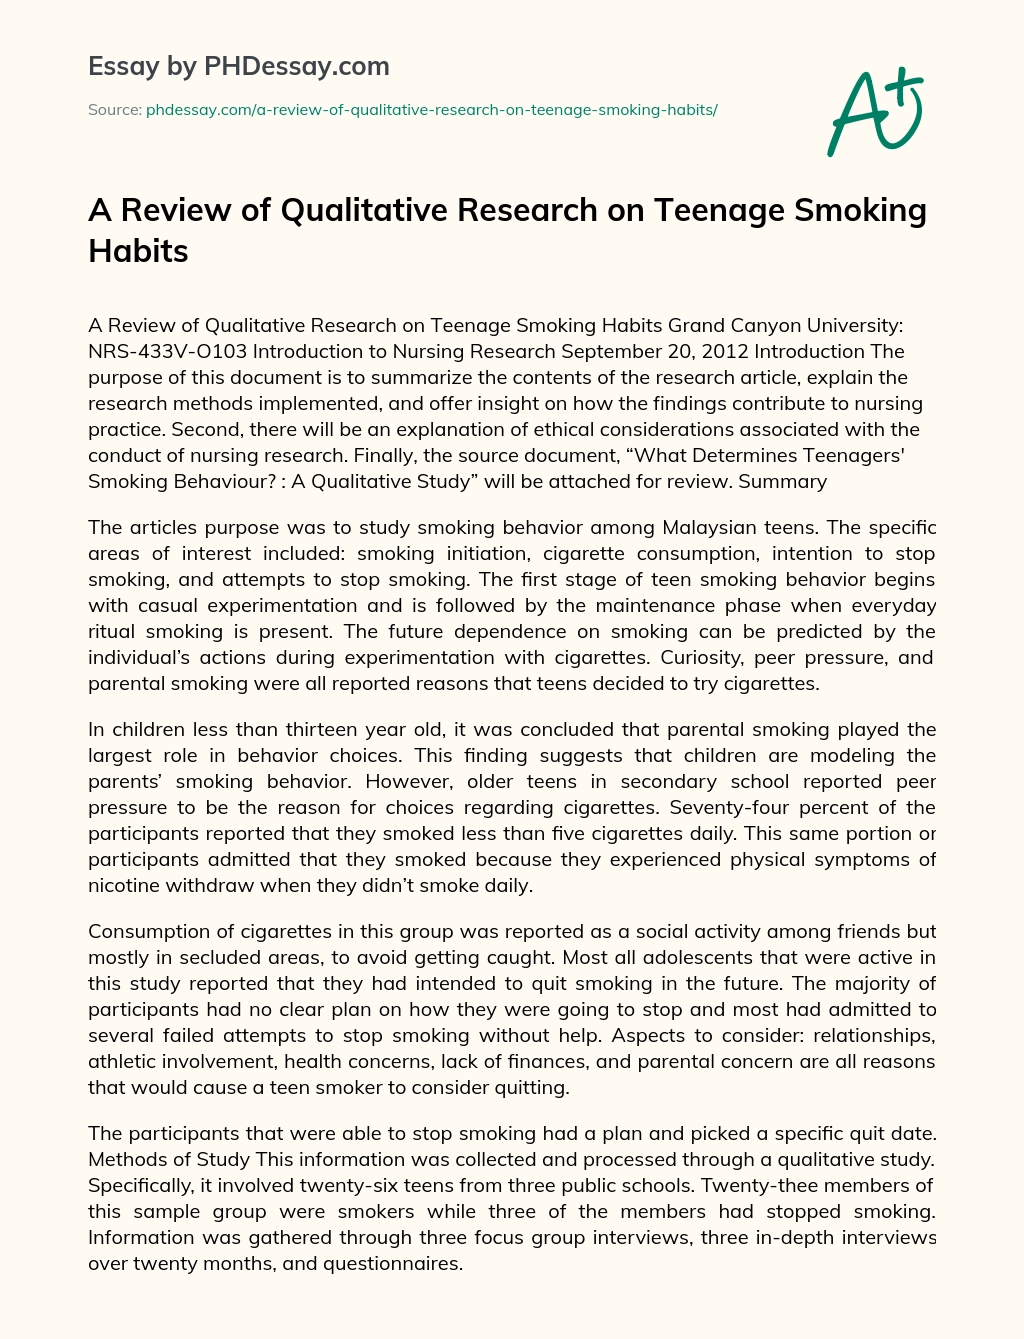 A Review of Qualitative Research on Teenage Smoking Habits essay